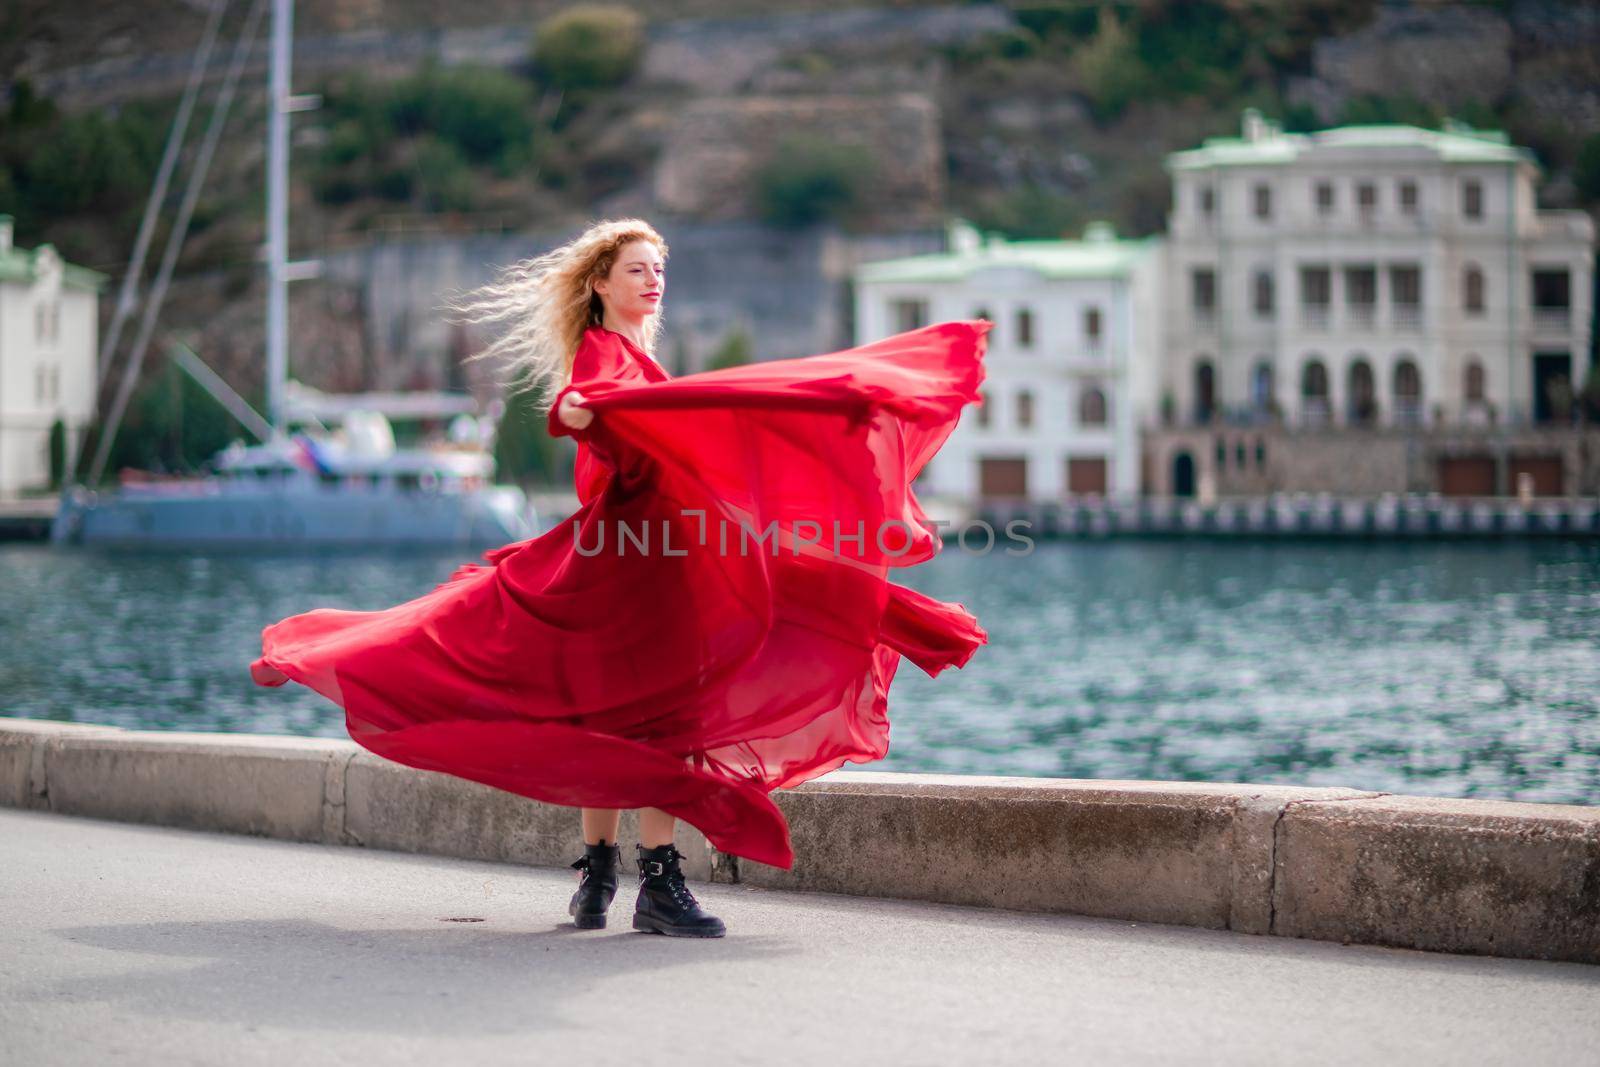 A woman in a red dress, a fashion model with long silk wings in a flowing dress, flying fabric on the embankment